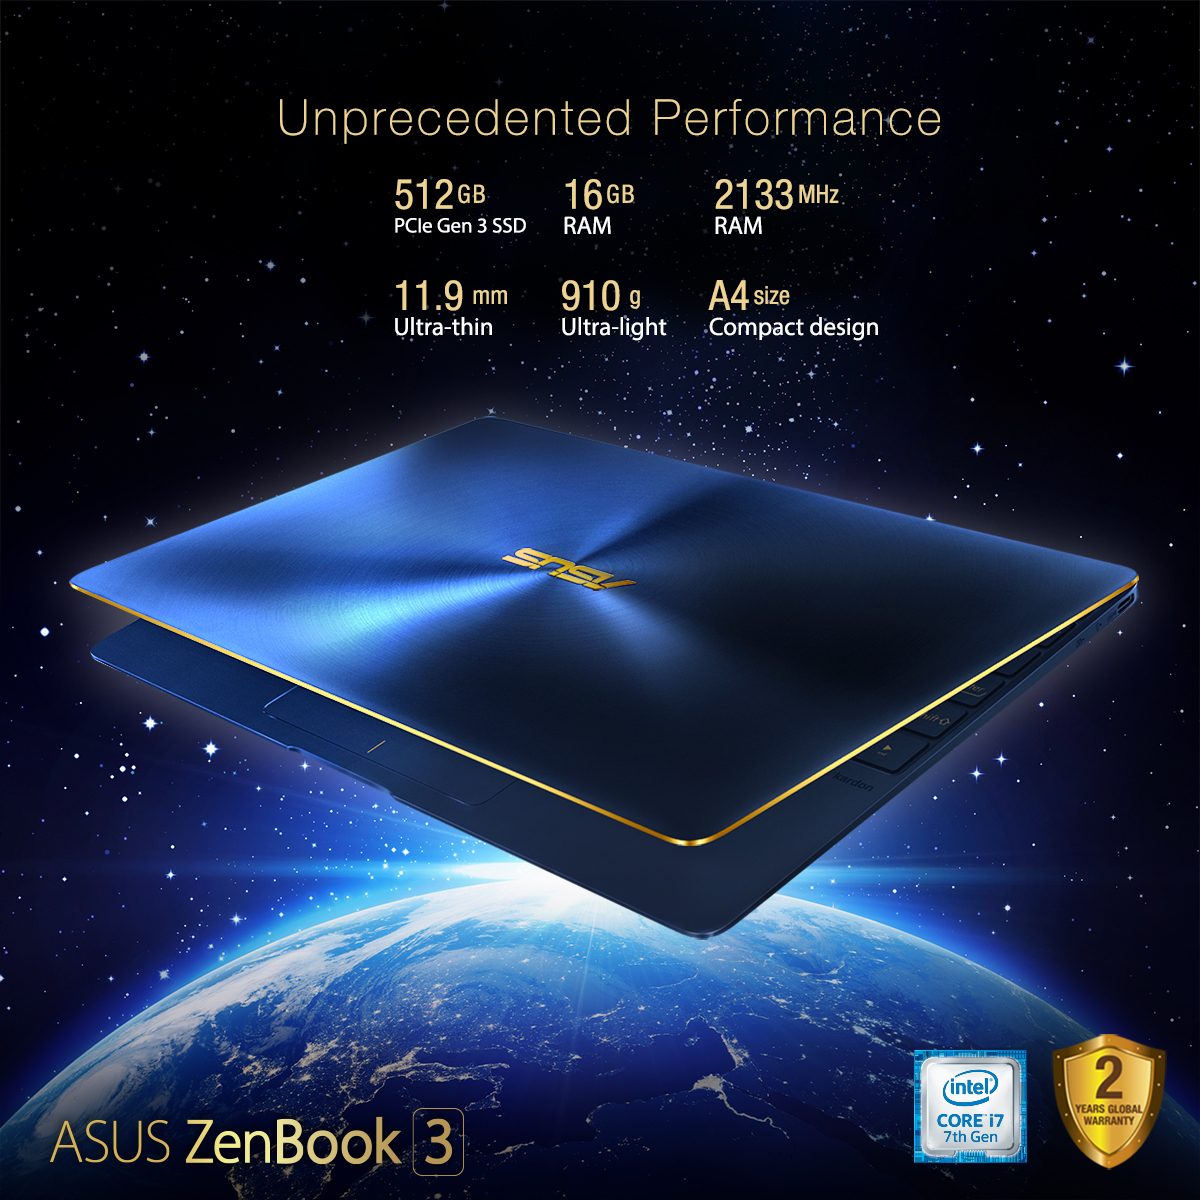 This is what you get when you match beauty and brawn, a perfect balance that can only be seen from the Zenbook 3!